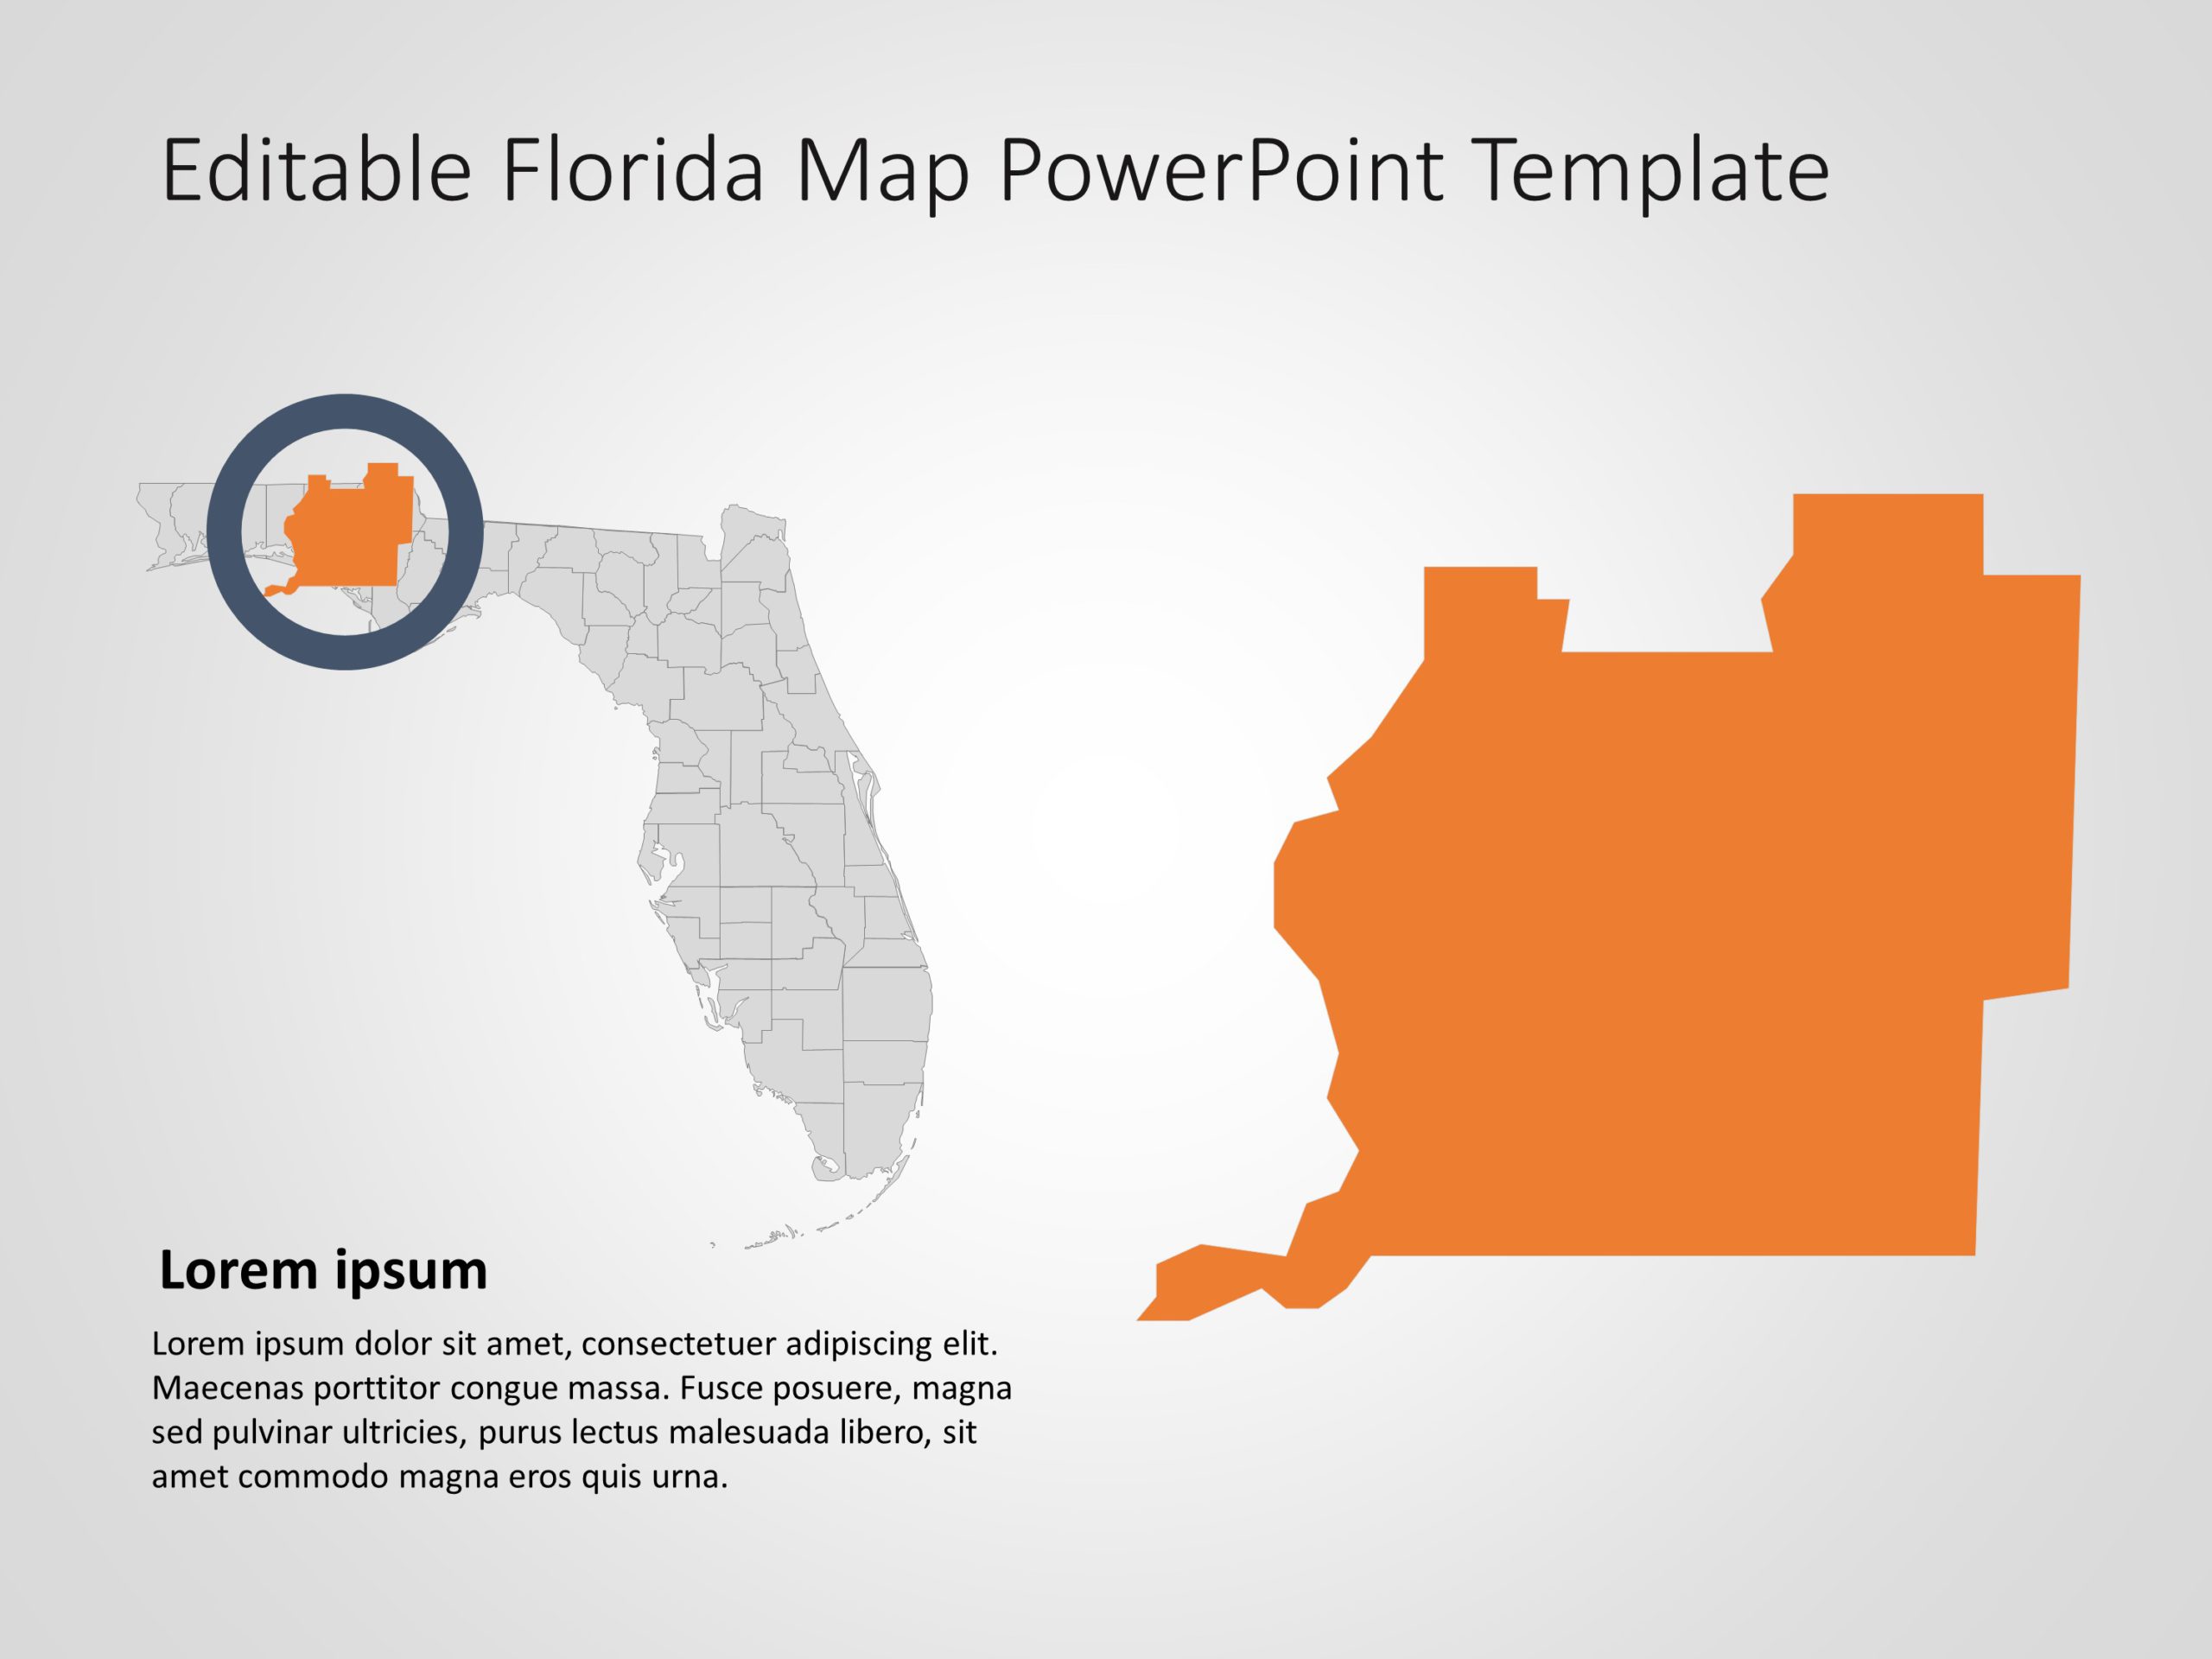 Florida Map 7 PowerPoint Template